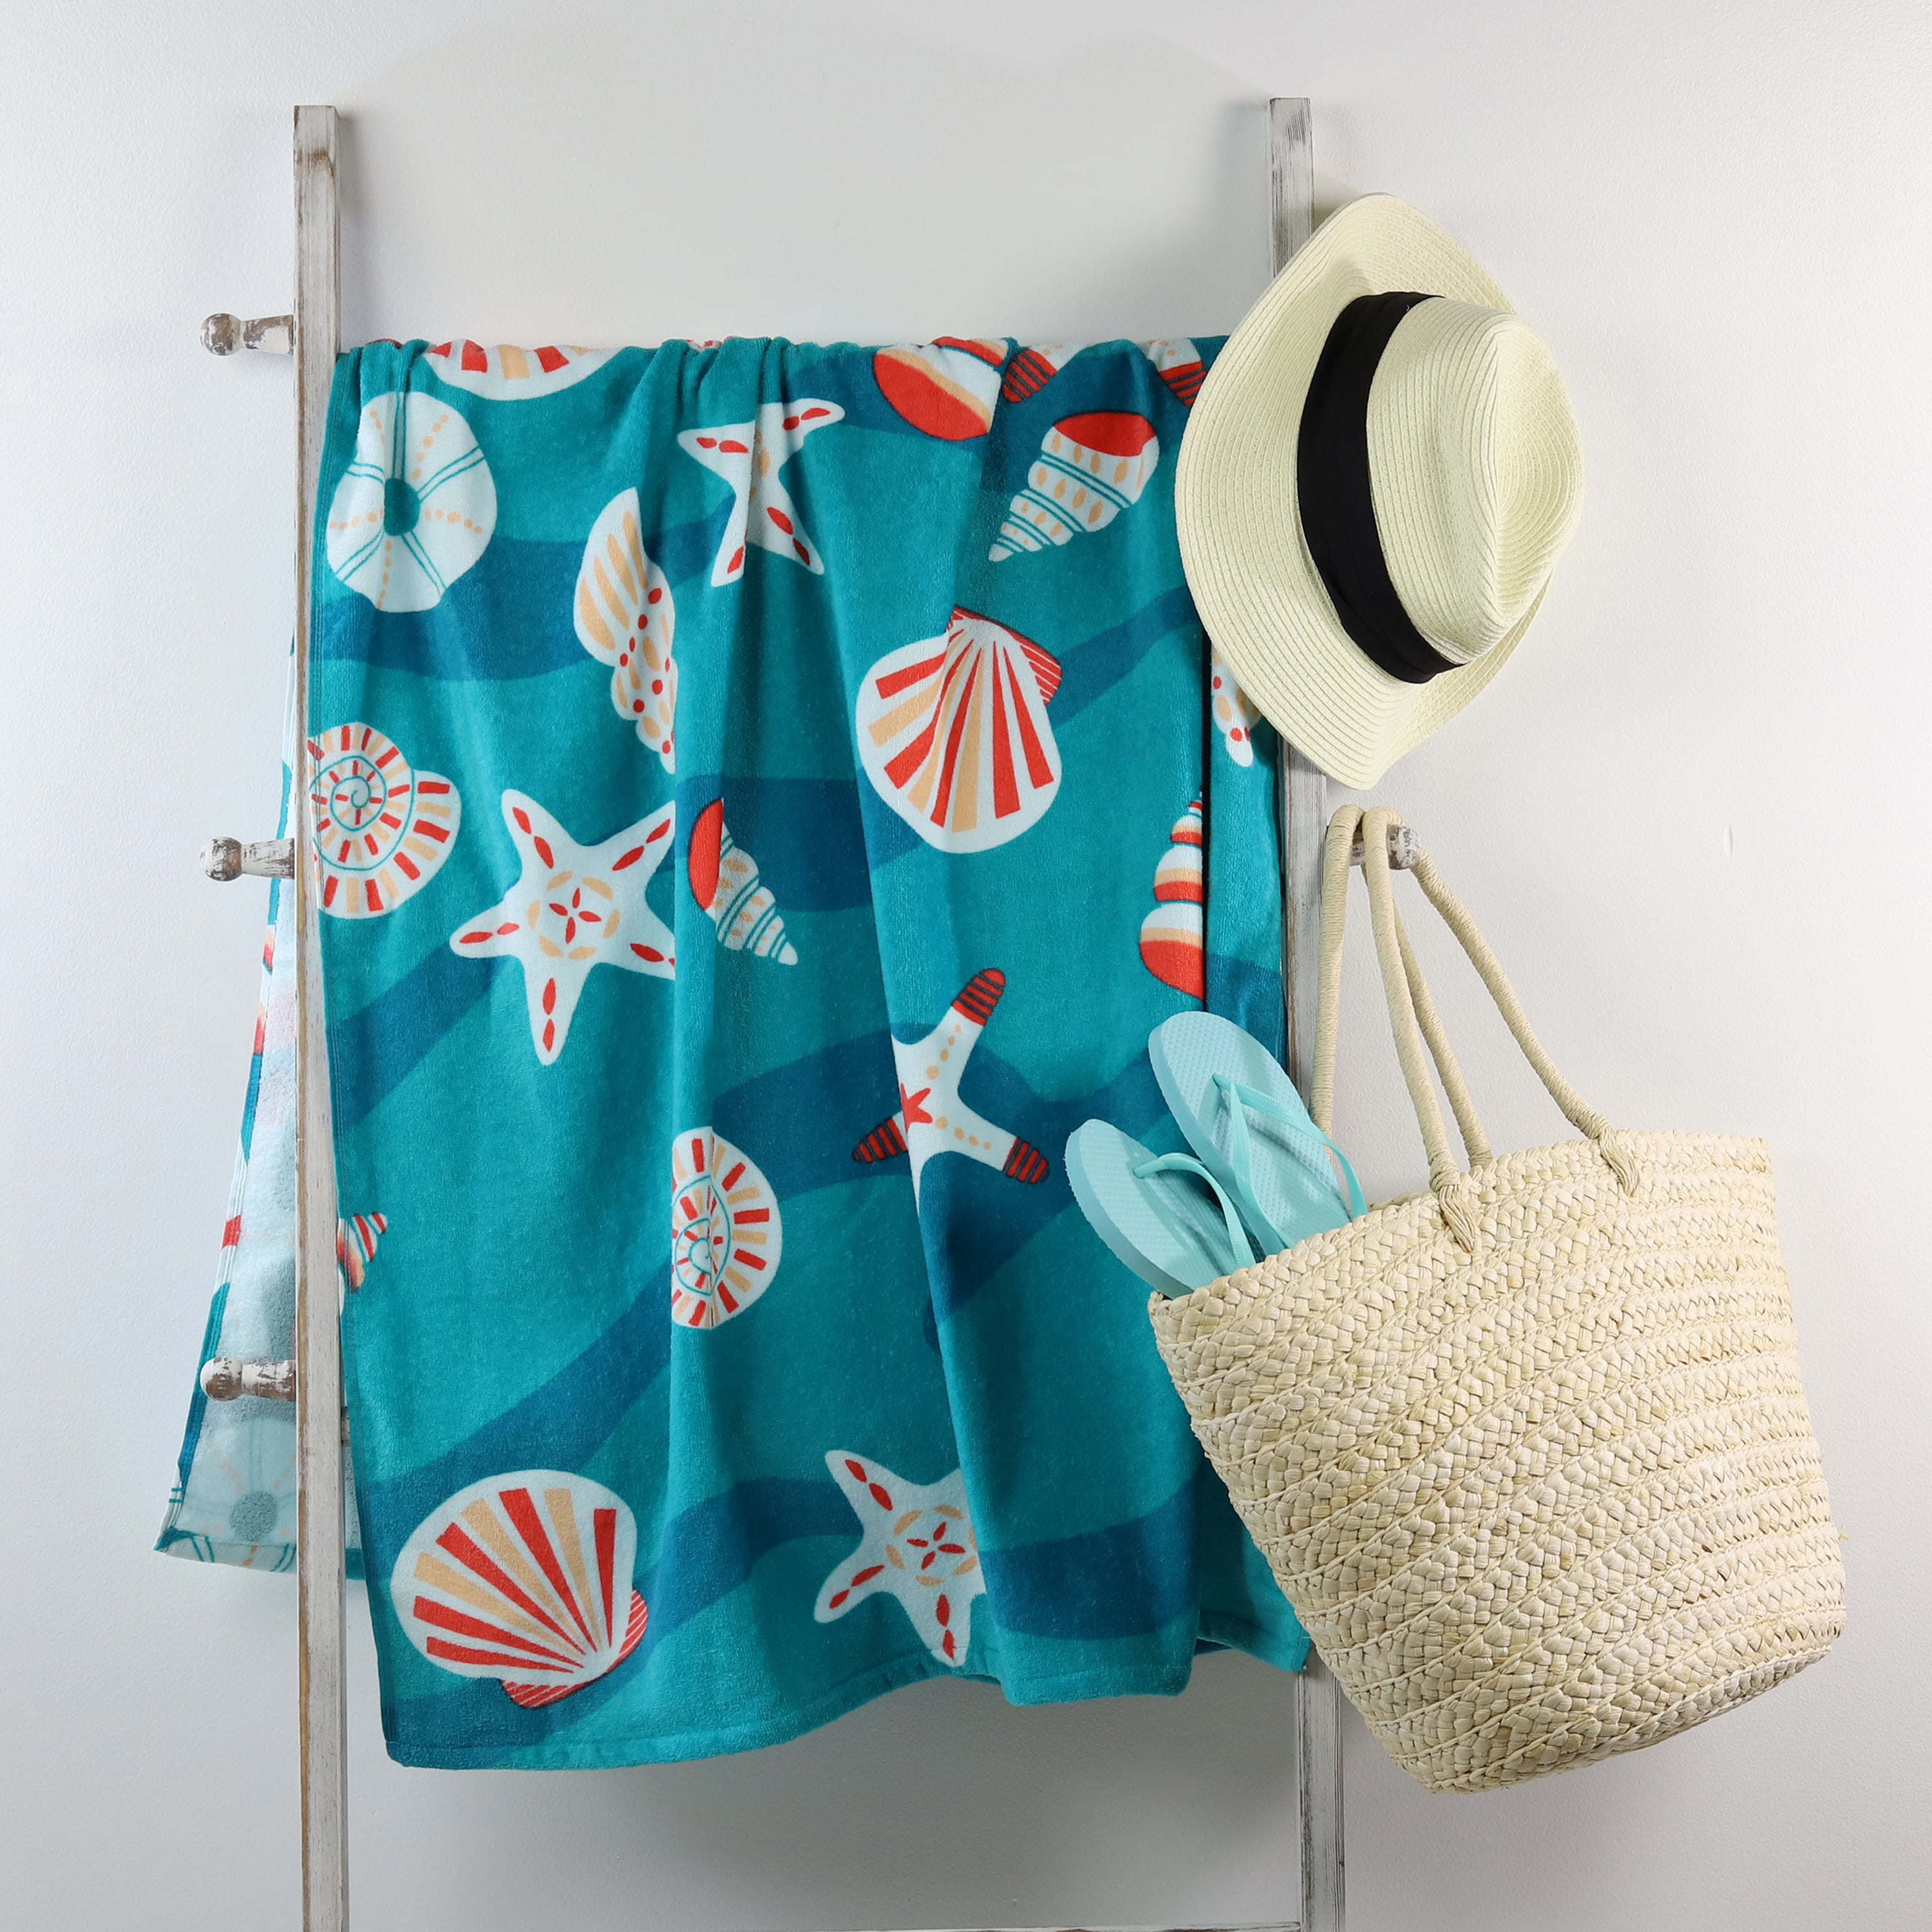 Details about   Mainstays Sea Shells Oversized Printed Beach Towel 34" x 64" 